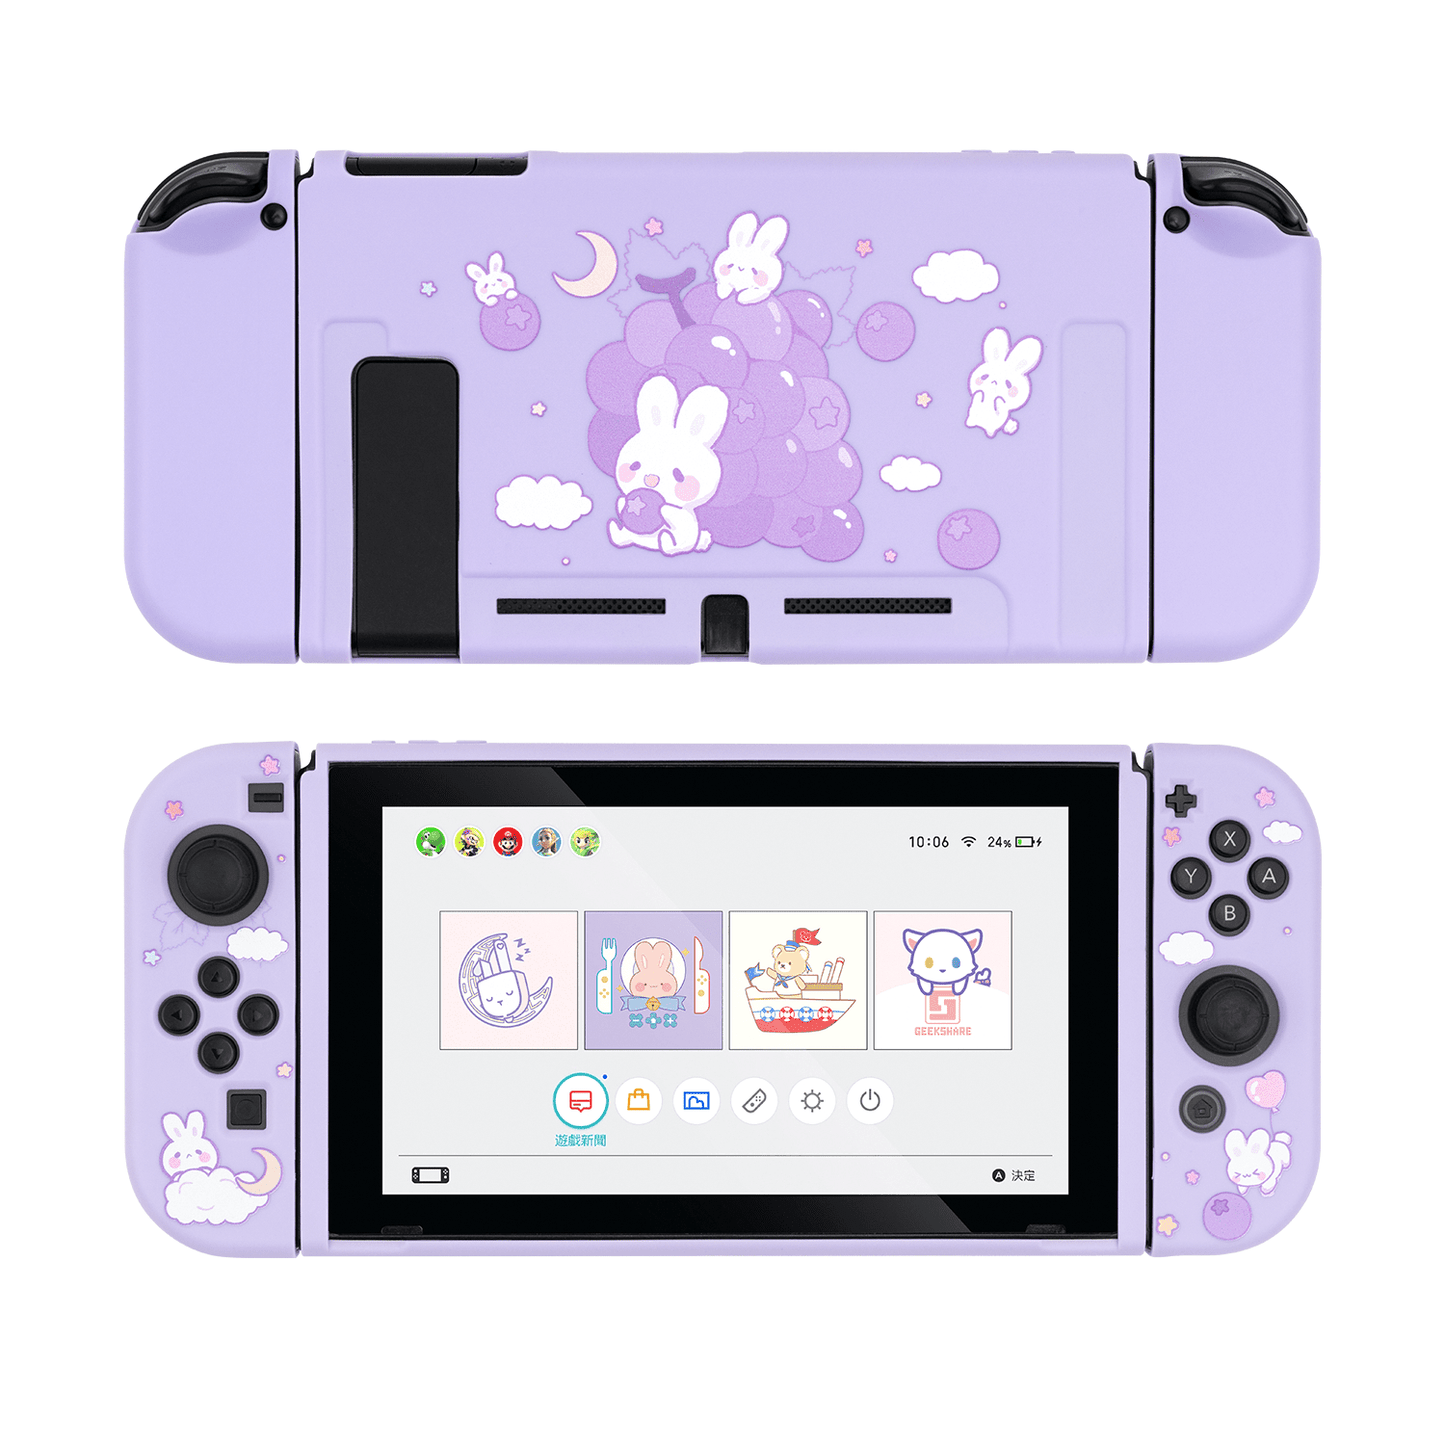 GeekShare Grape Bunny Protective Case GeekShare Protective Case for Switch, Soft TPU Slim Case Cover Compatible with Nintendo Switch Console and Joy-Con (Grape Bunny) 成功活跃